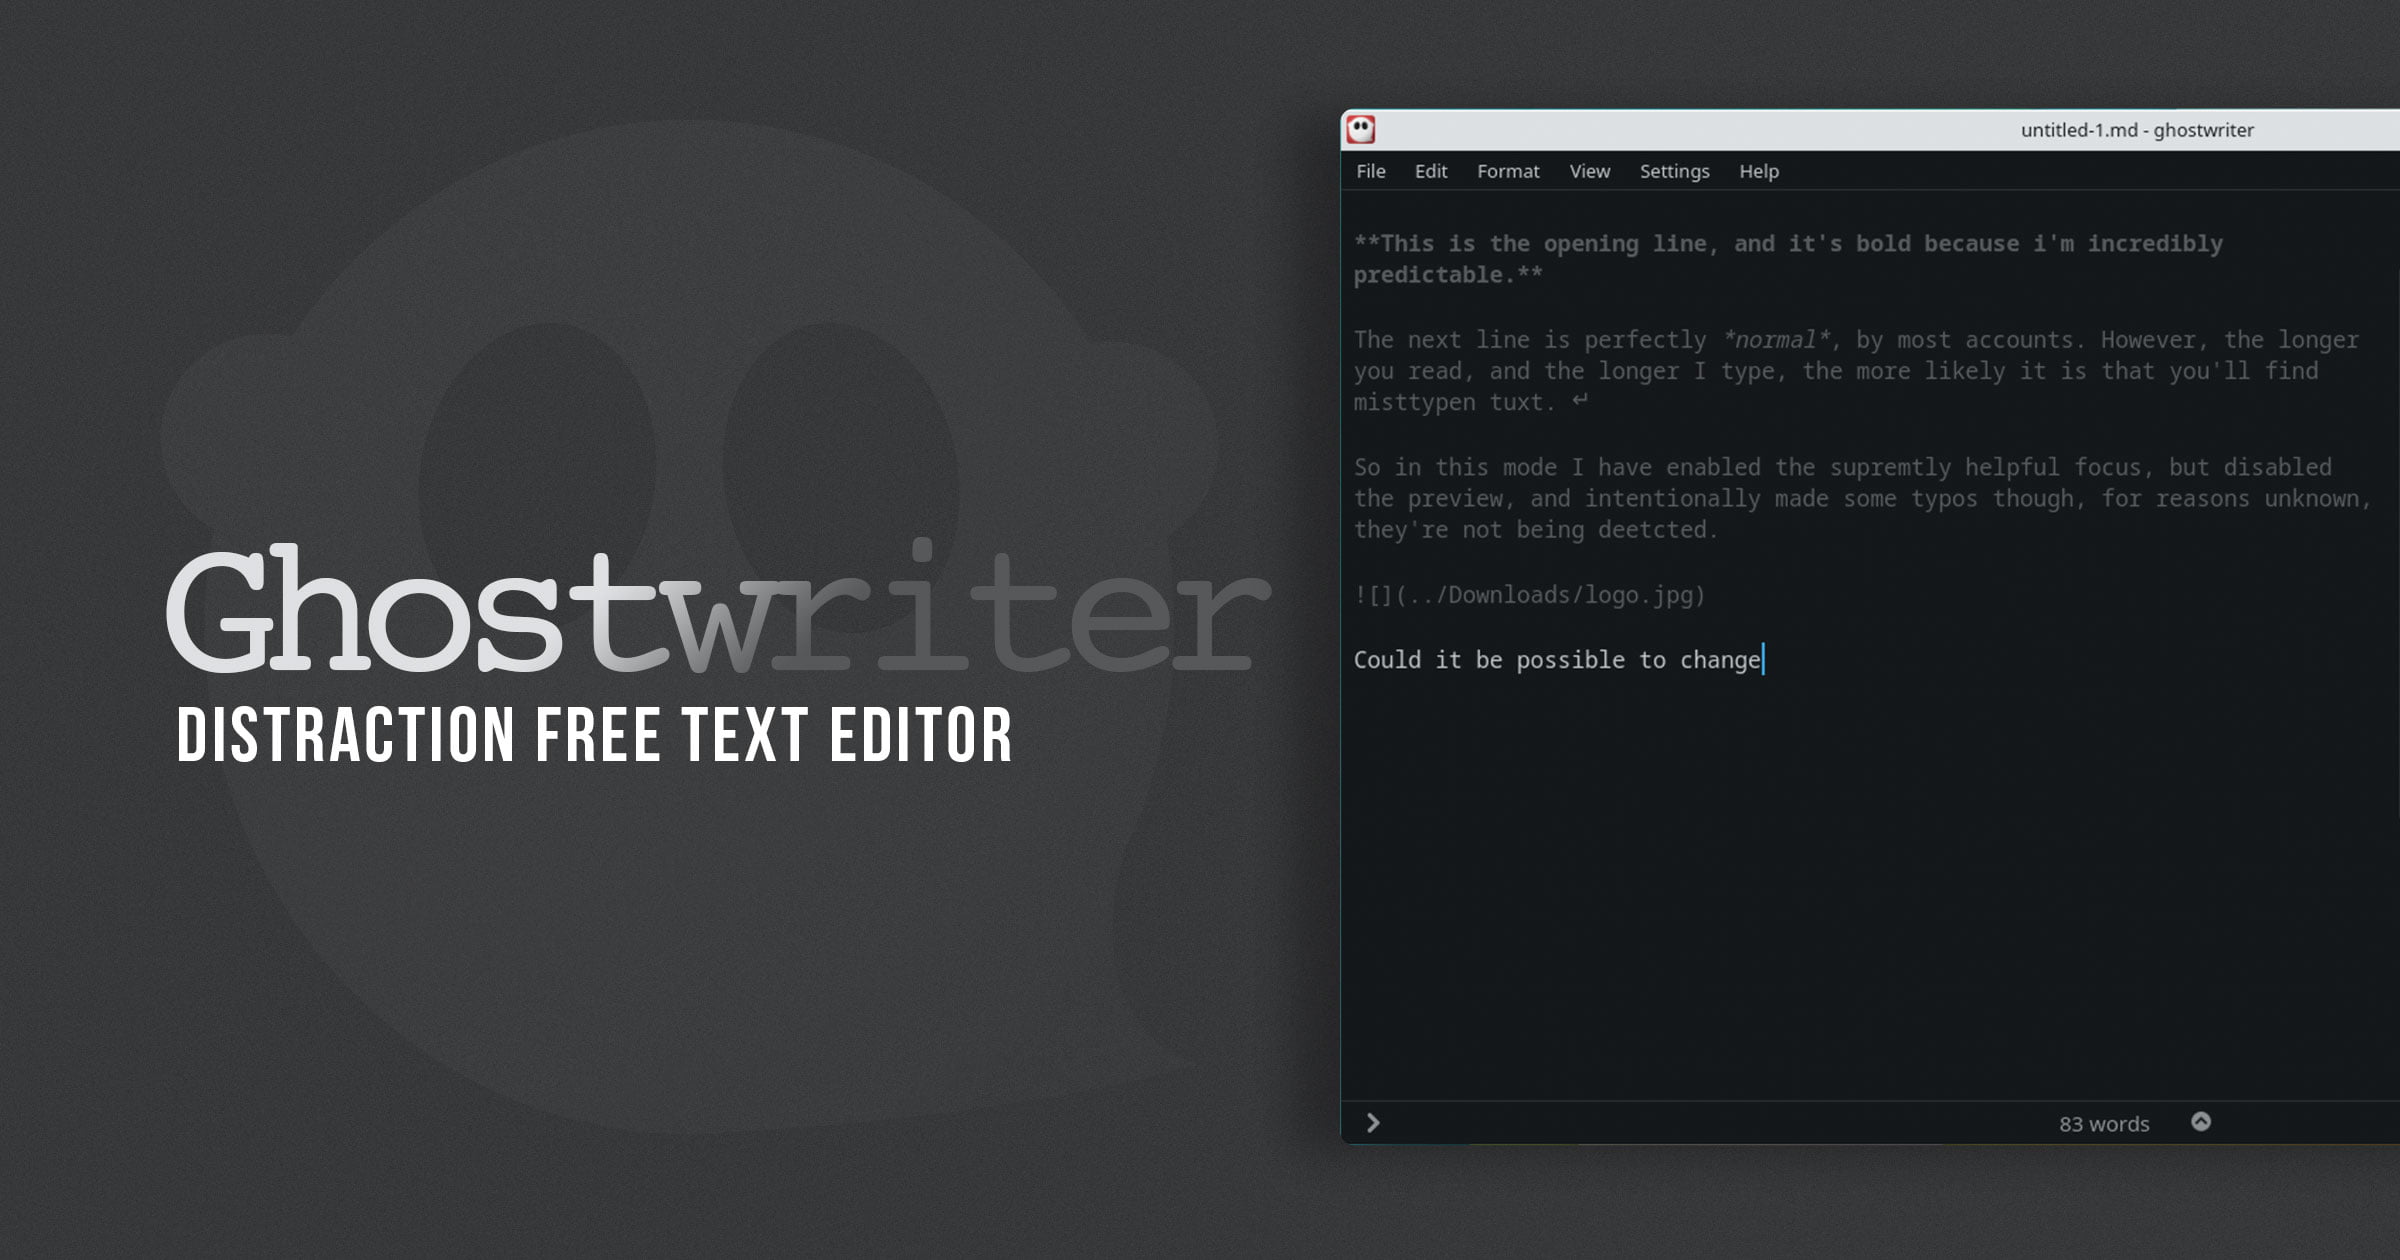 Ghostwriter is a Spookily Good Distraction Free Writing App for Linux